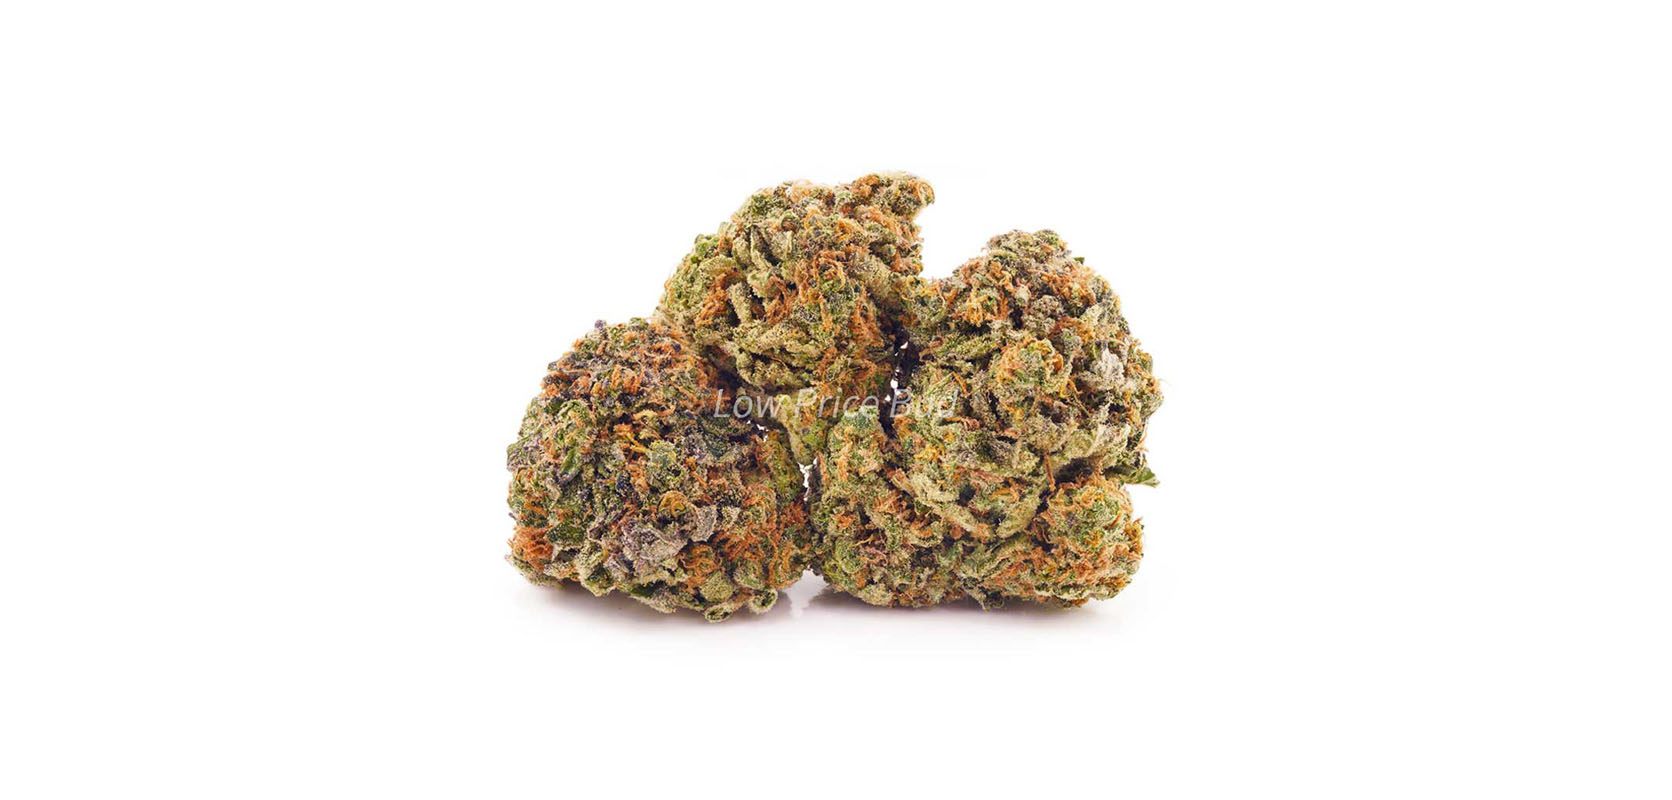 Buy Orange Creamsicle weed online Canada from Low Price Bud dispensary for BC cannabis. online dispensary canada to buy weeds online. cannabis canada. Dispencary.